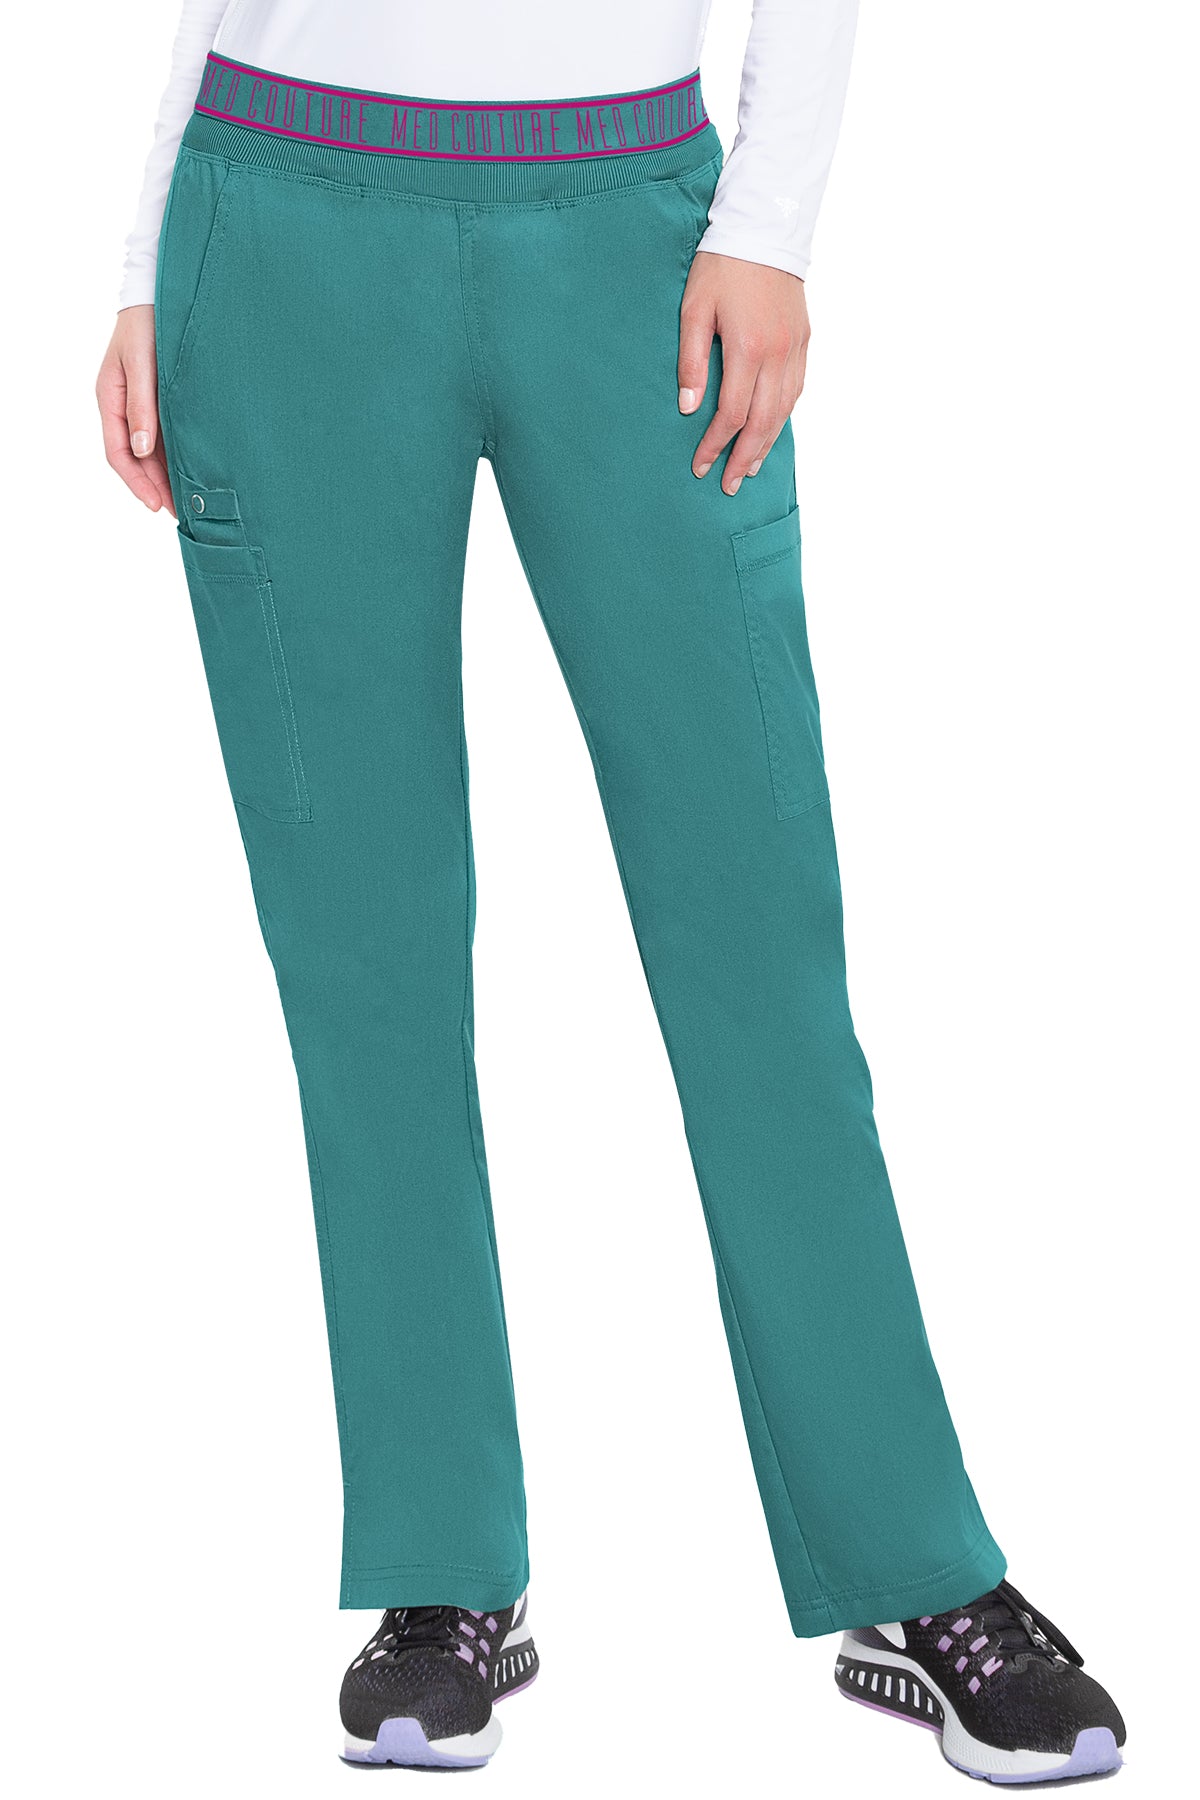 Yoga 2 Cargo Pocket Pant by Med Couture (Regular) XS-5XL/ Teal